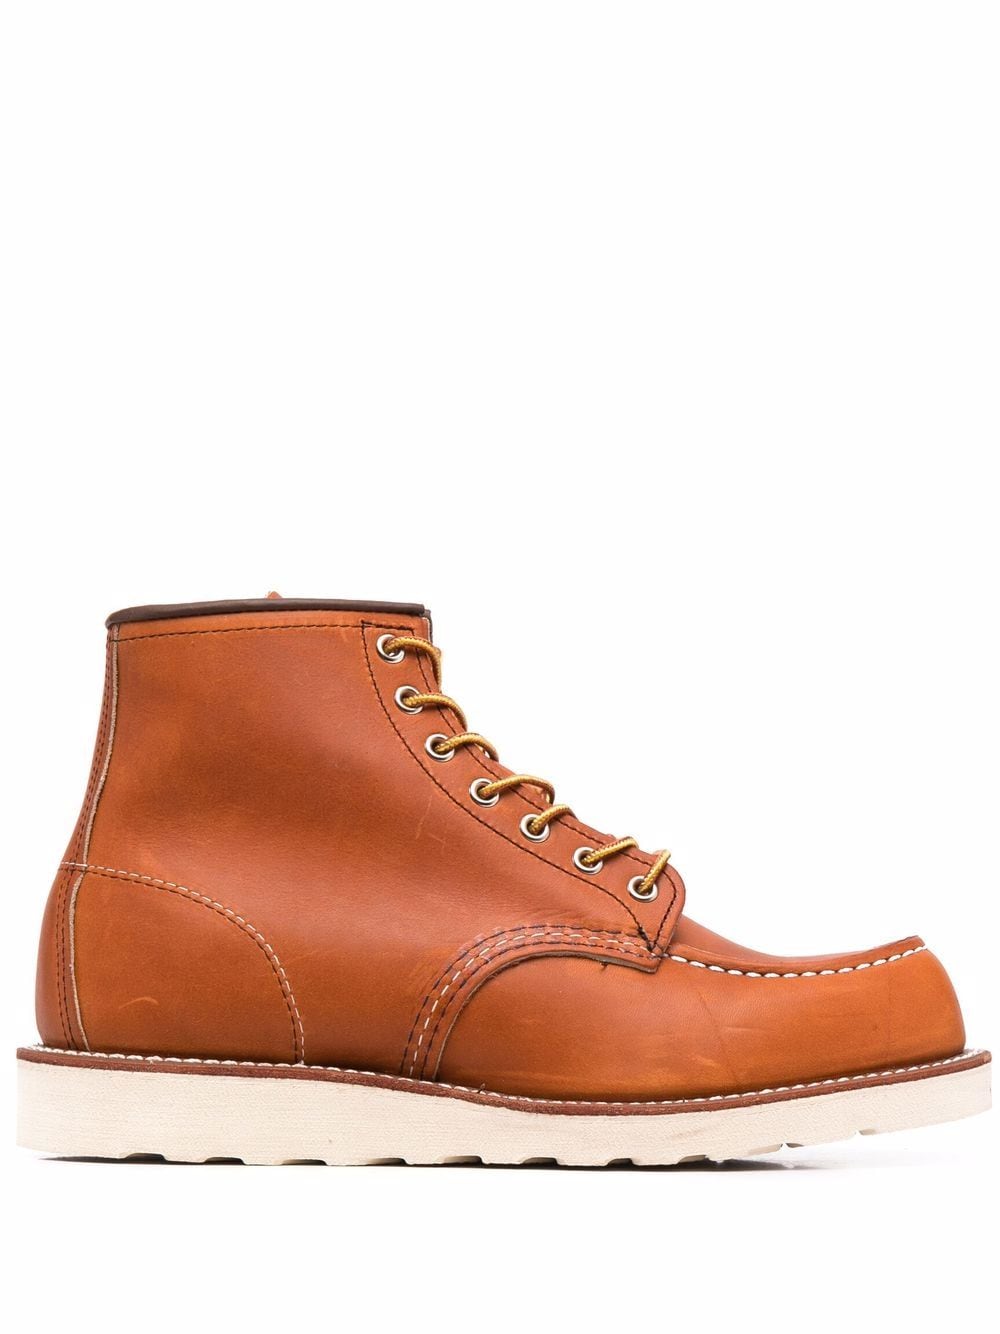 Luggage brown leather lace-up leather boots